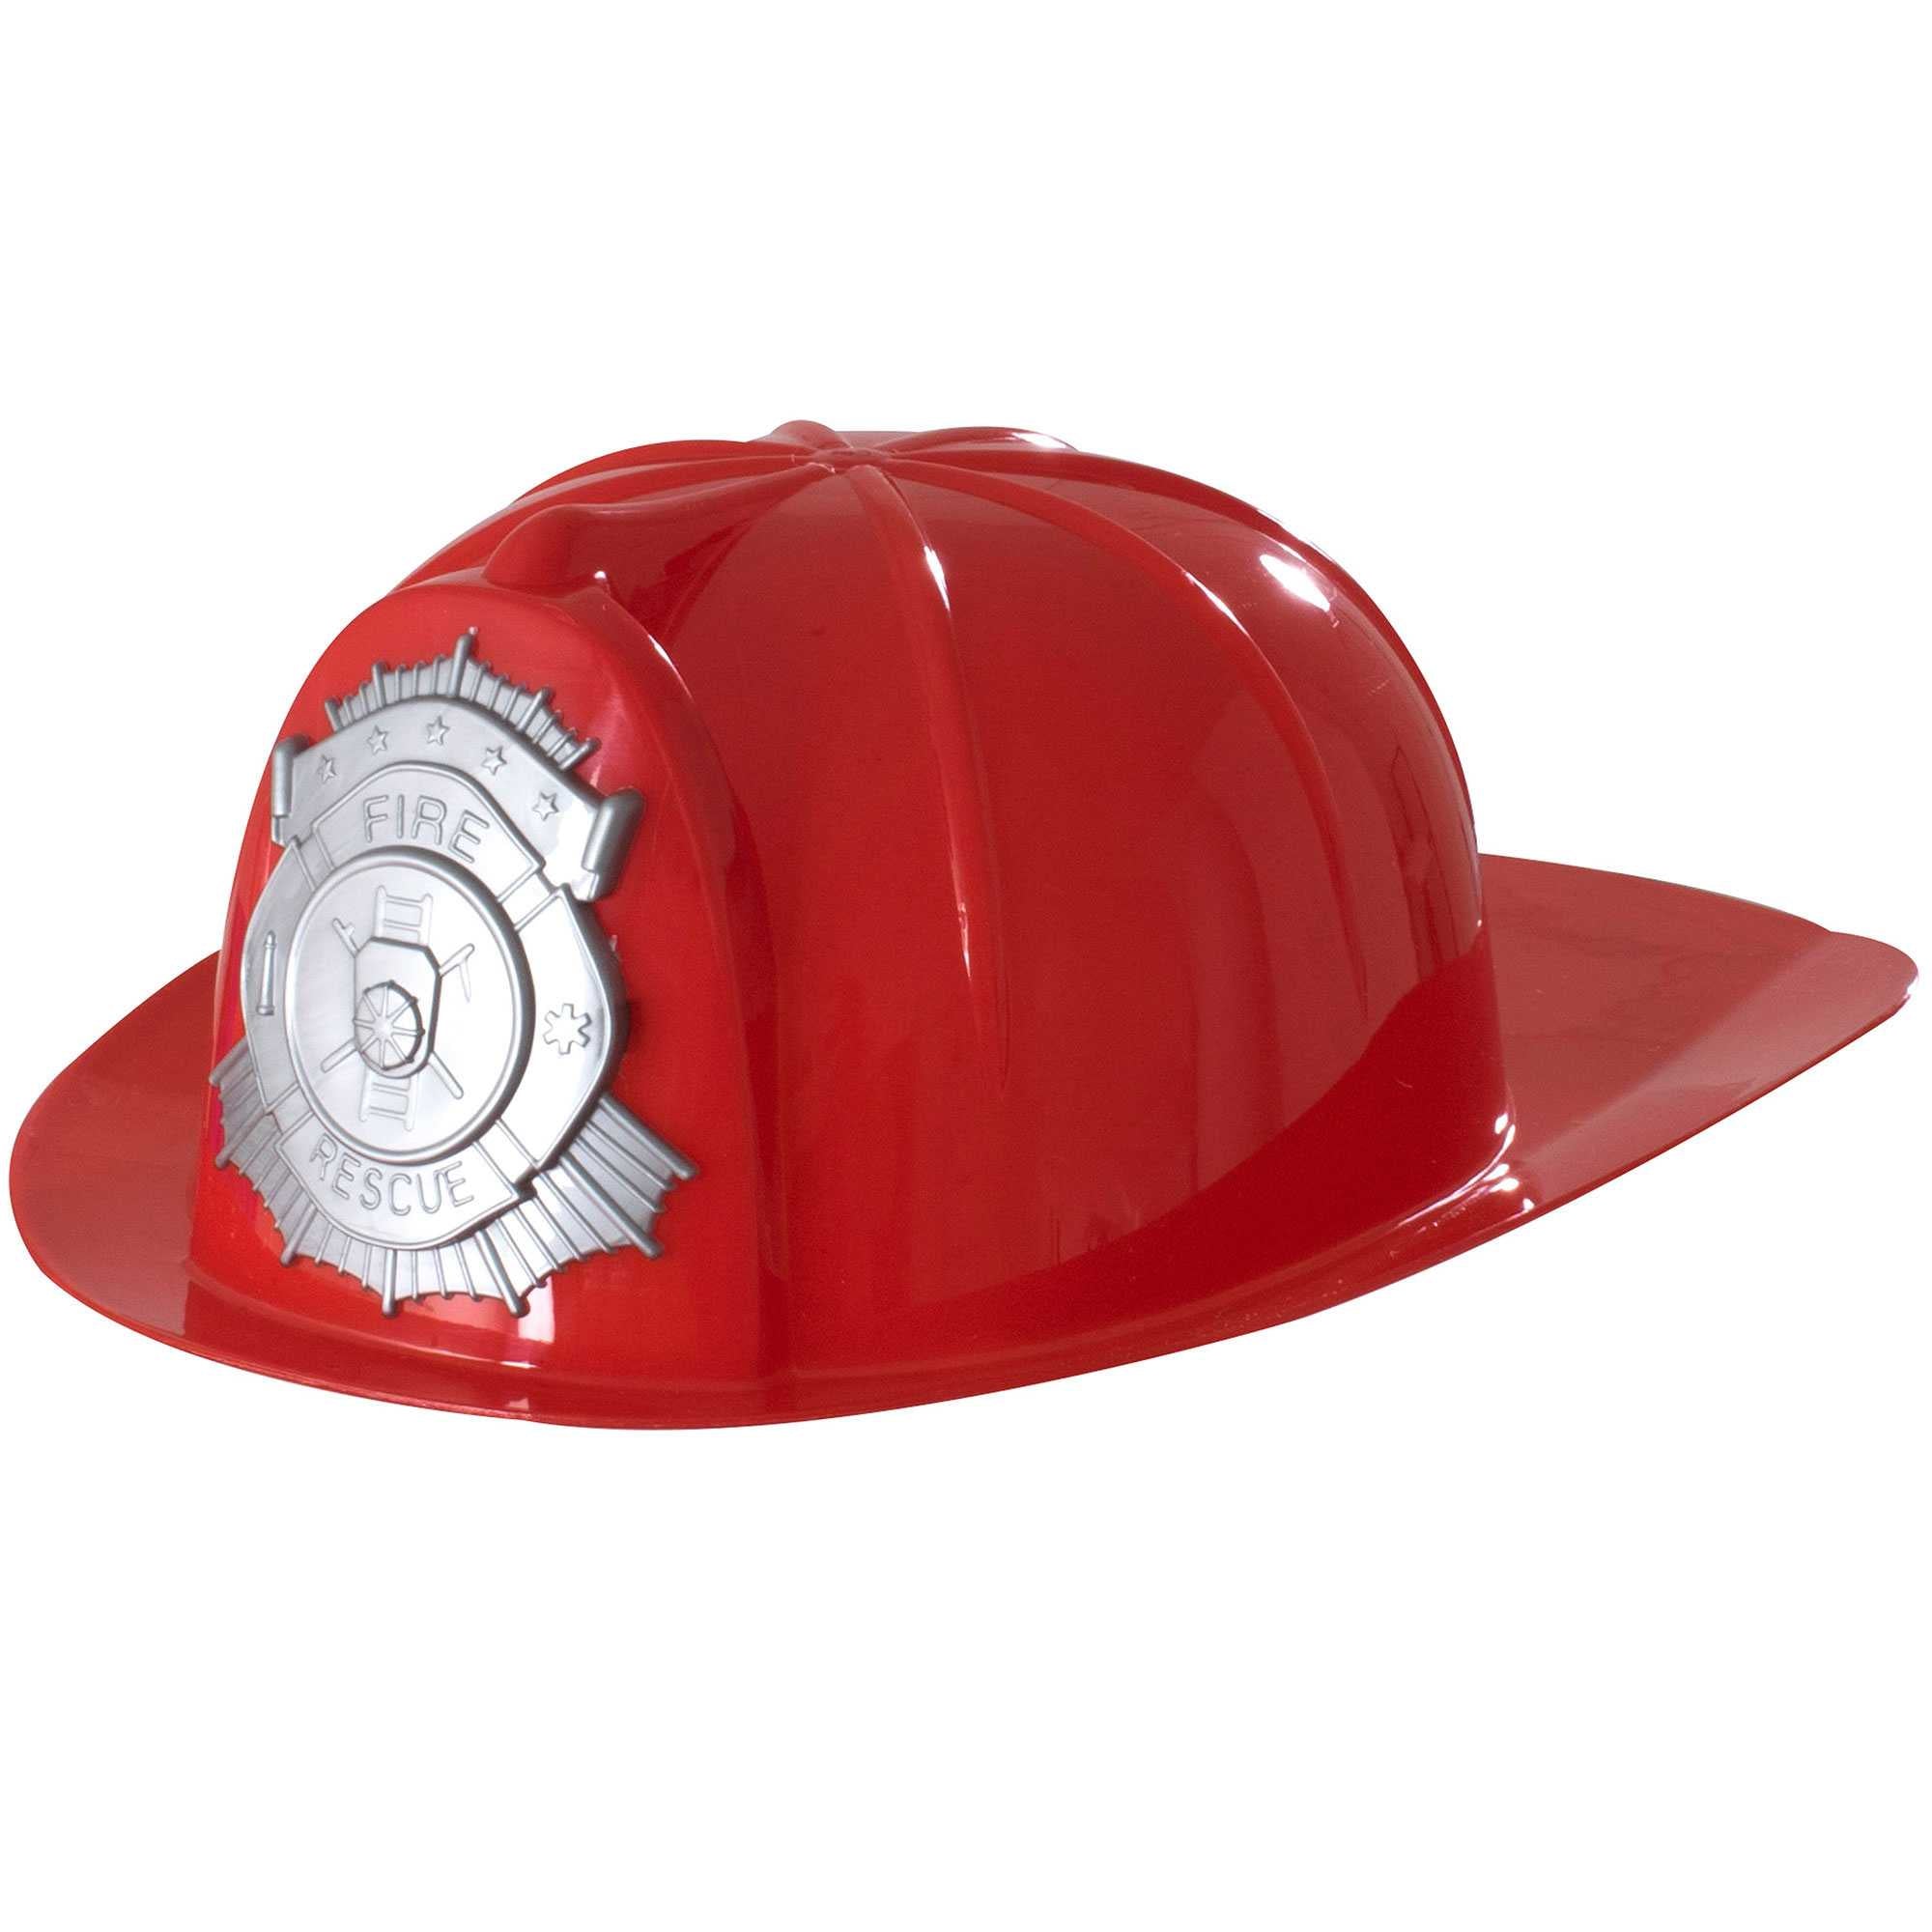 Image of Childrens Fancy Dress Fireman Hats - Red